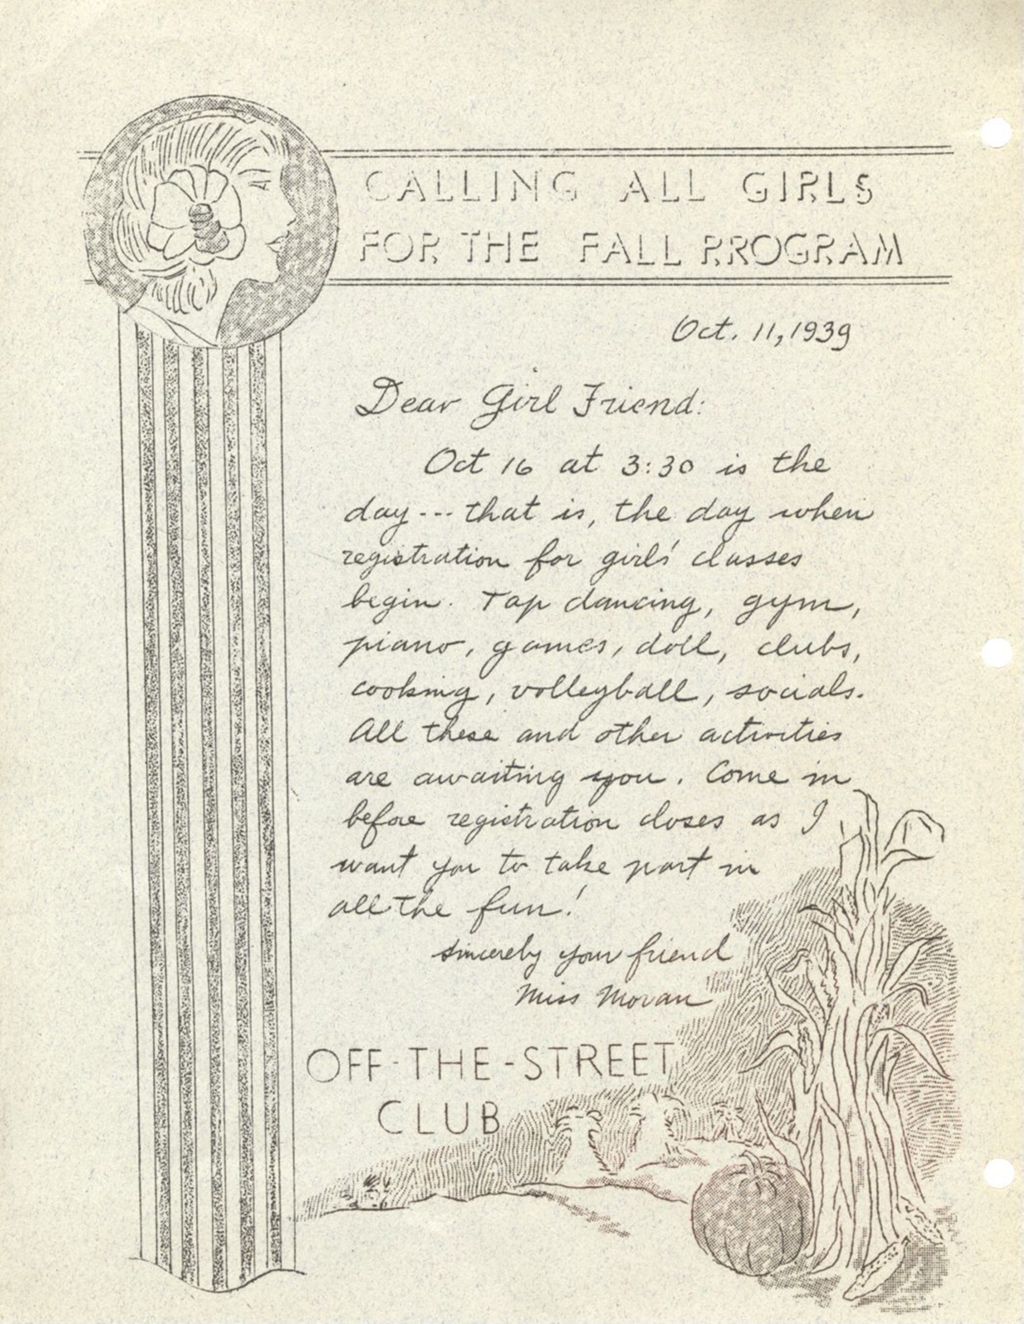 Miniature of Fall Program flyer for Girls' classes, Off-The-Street Club